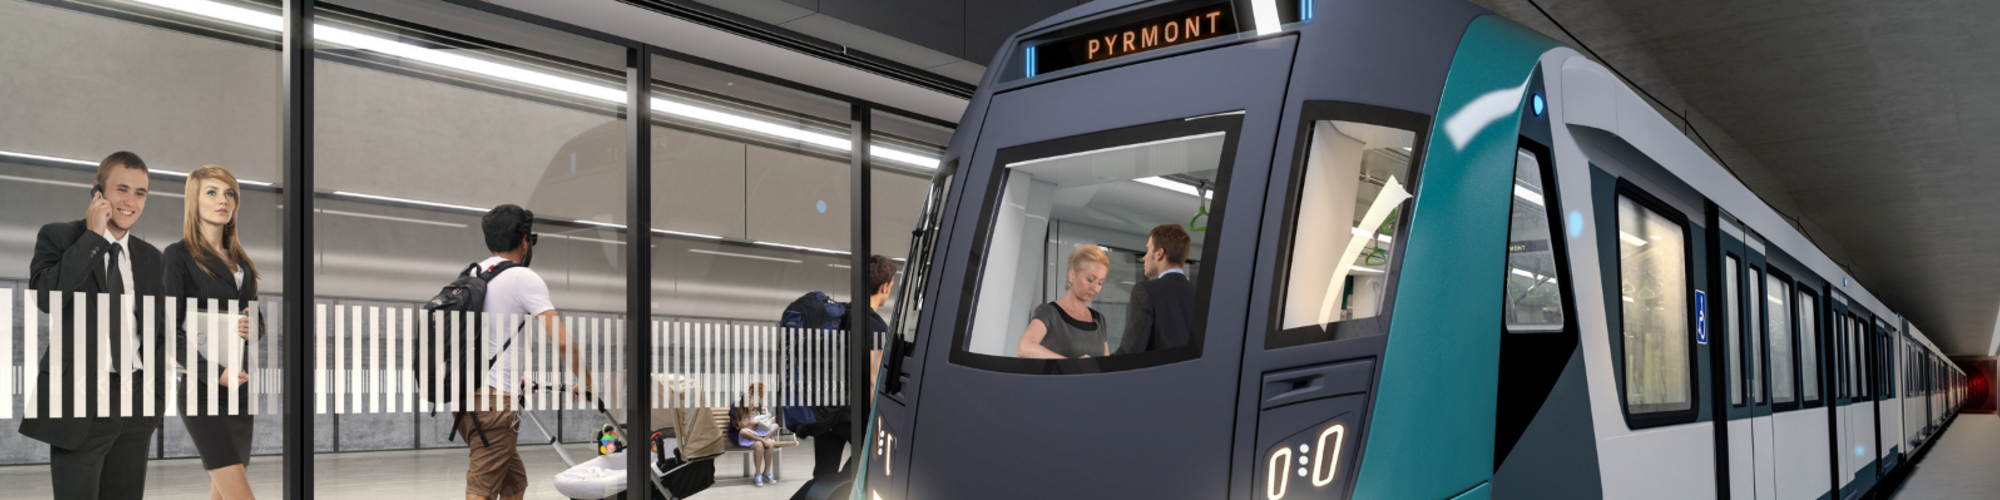 An artist's impression of the view to Sydney Metro Pyrmont Station entrance from Union Street with Sydney CBD in background. The station is a part of the Sydney Metro West project.